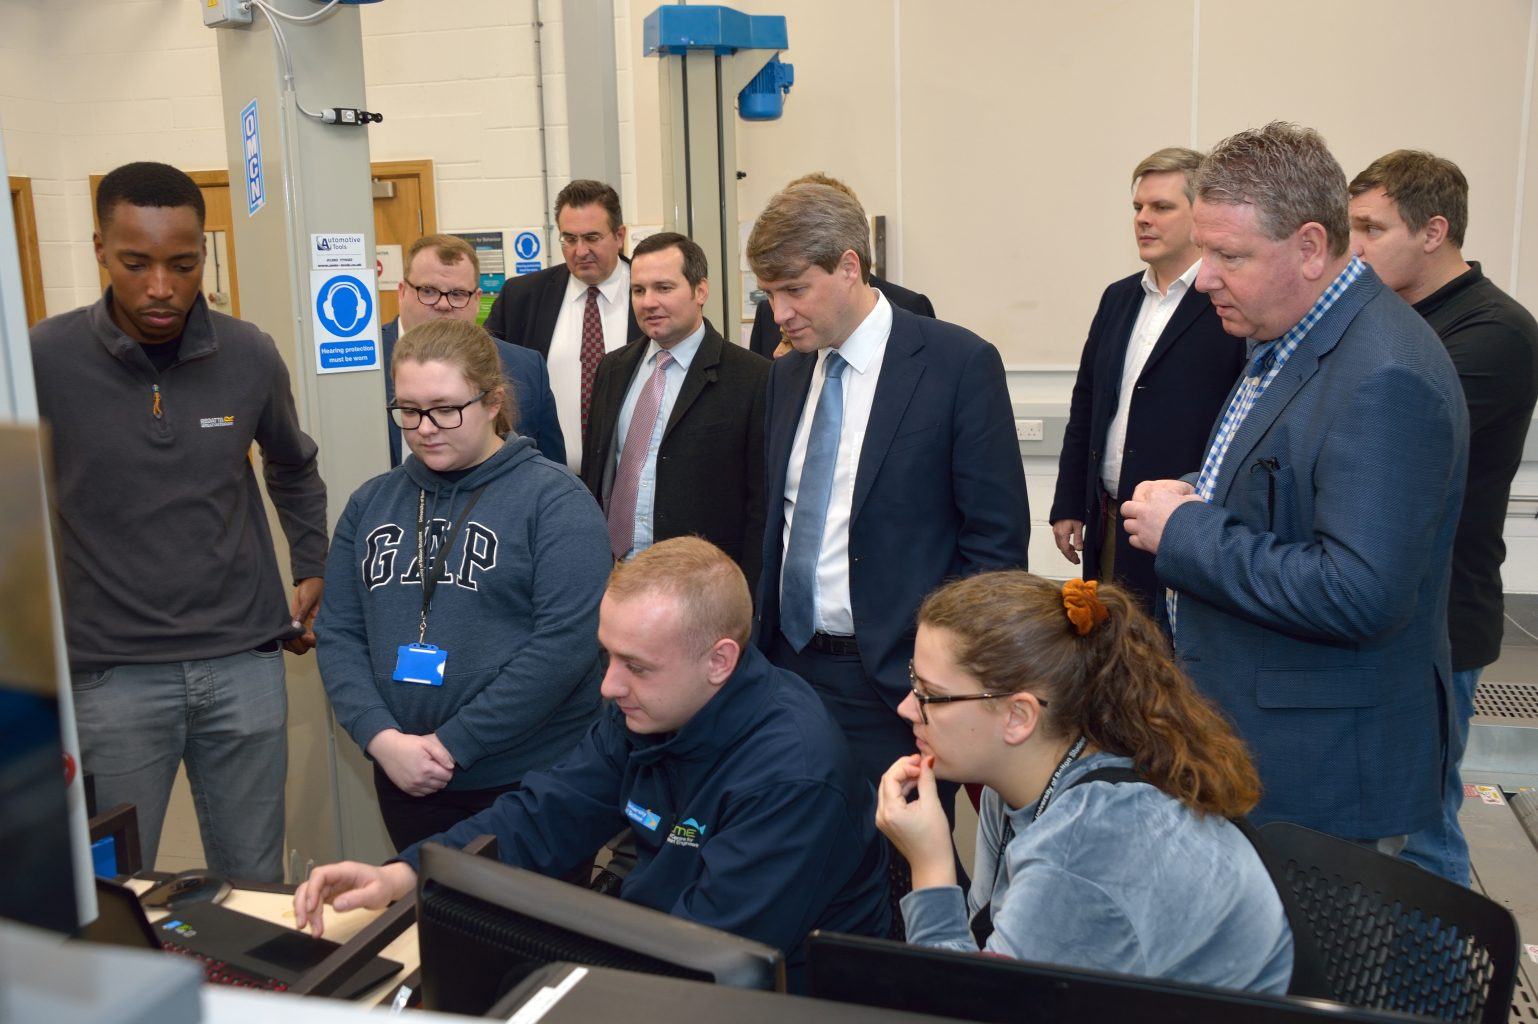 The Minister Of State For Universities, Science, Research & Innovation Visits The University of Bolton